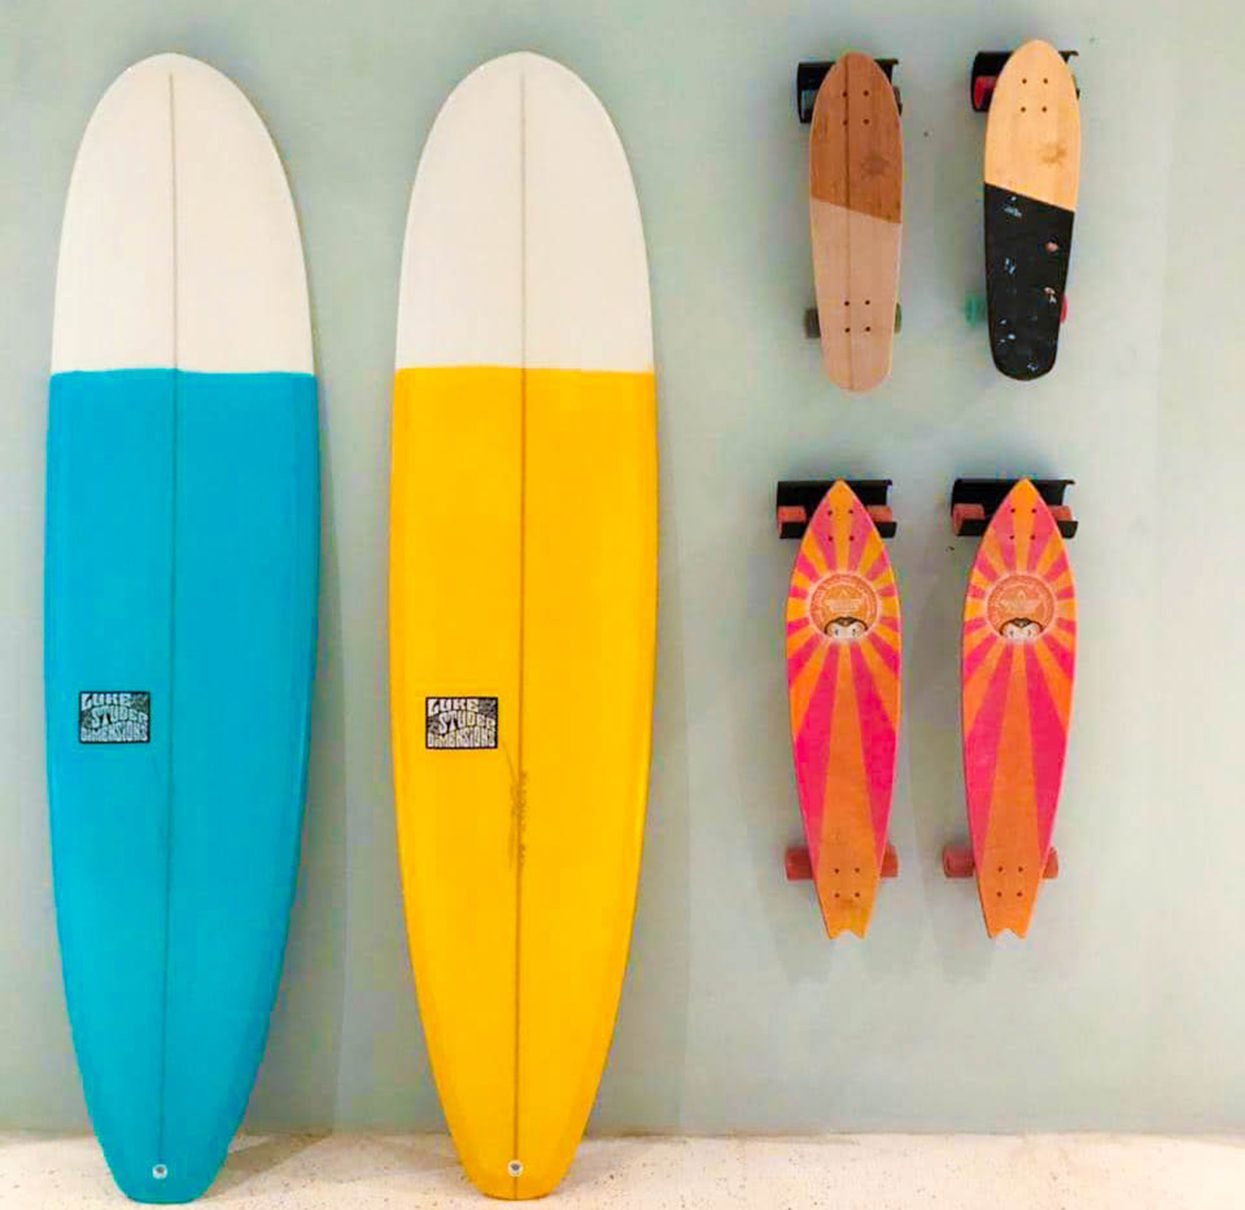 Colourful surfboards and skateboards are free for guests to borrow